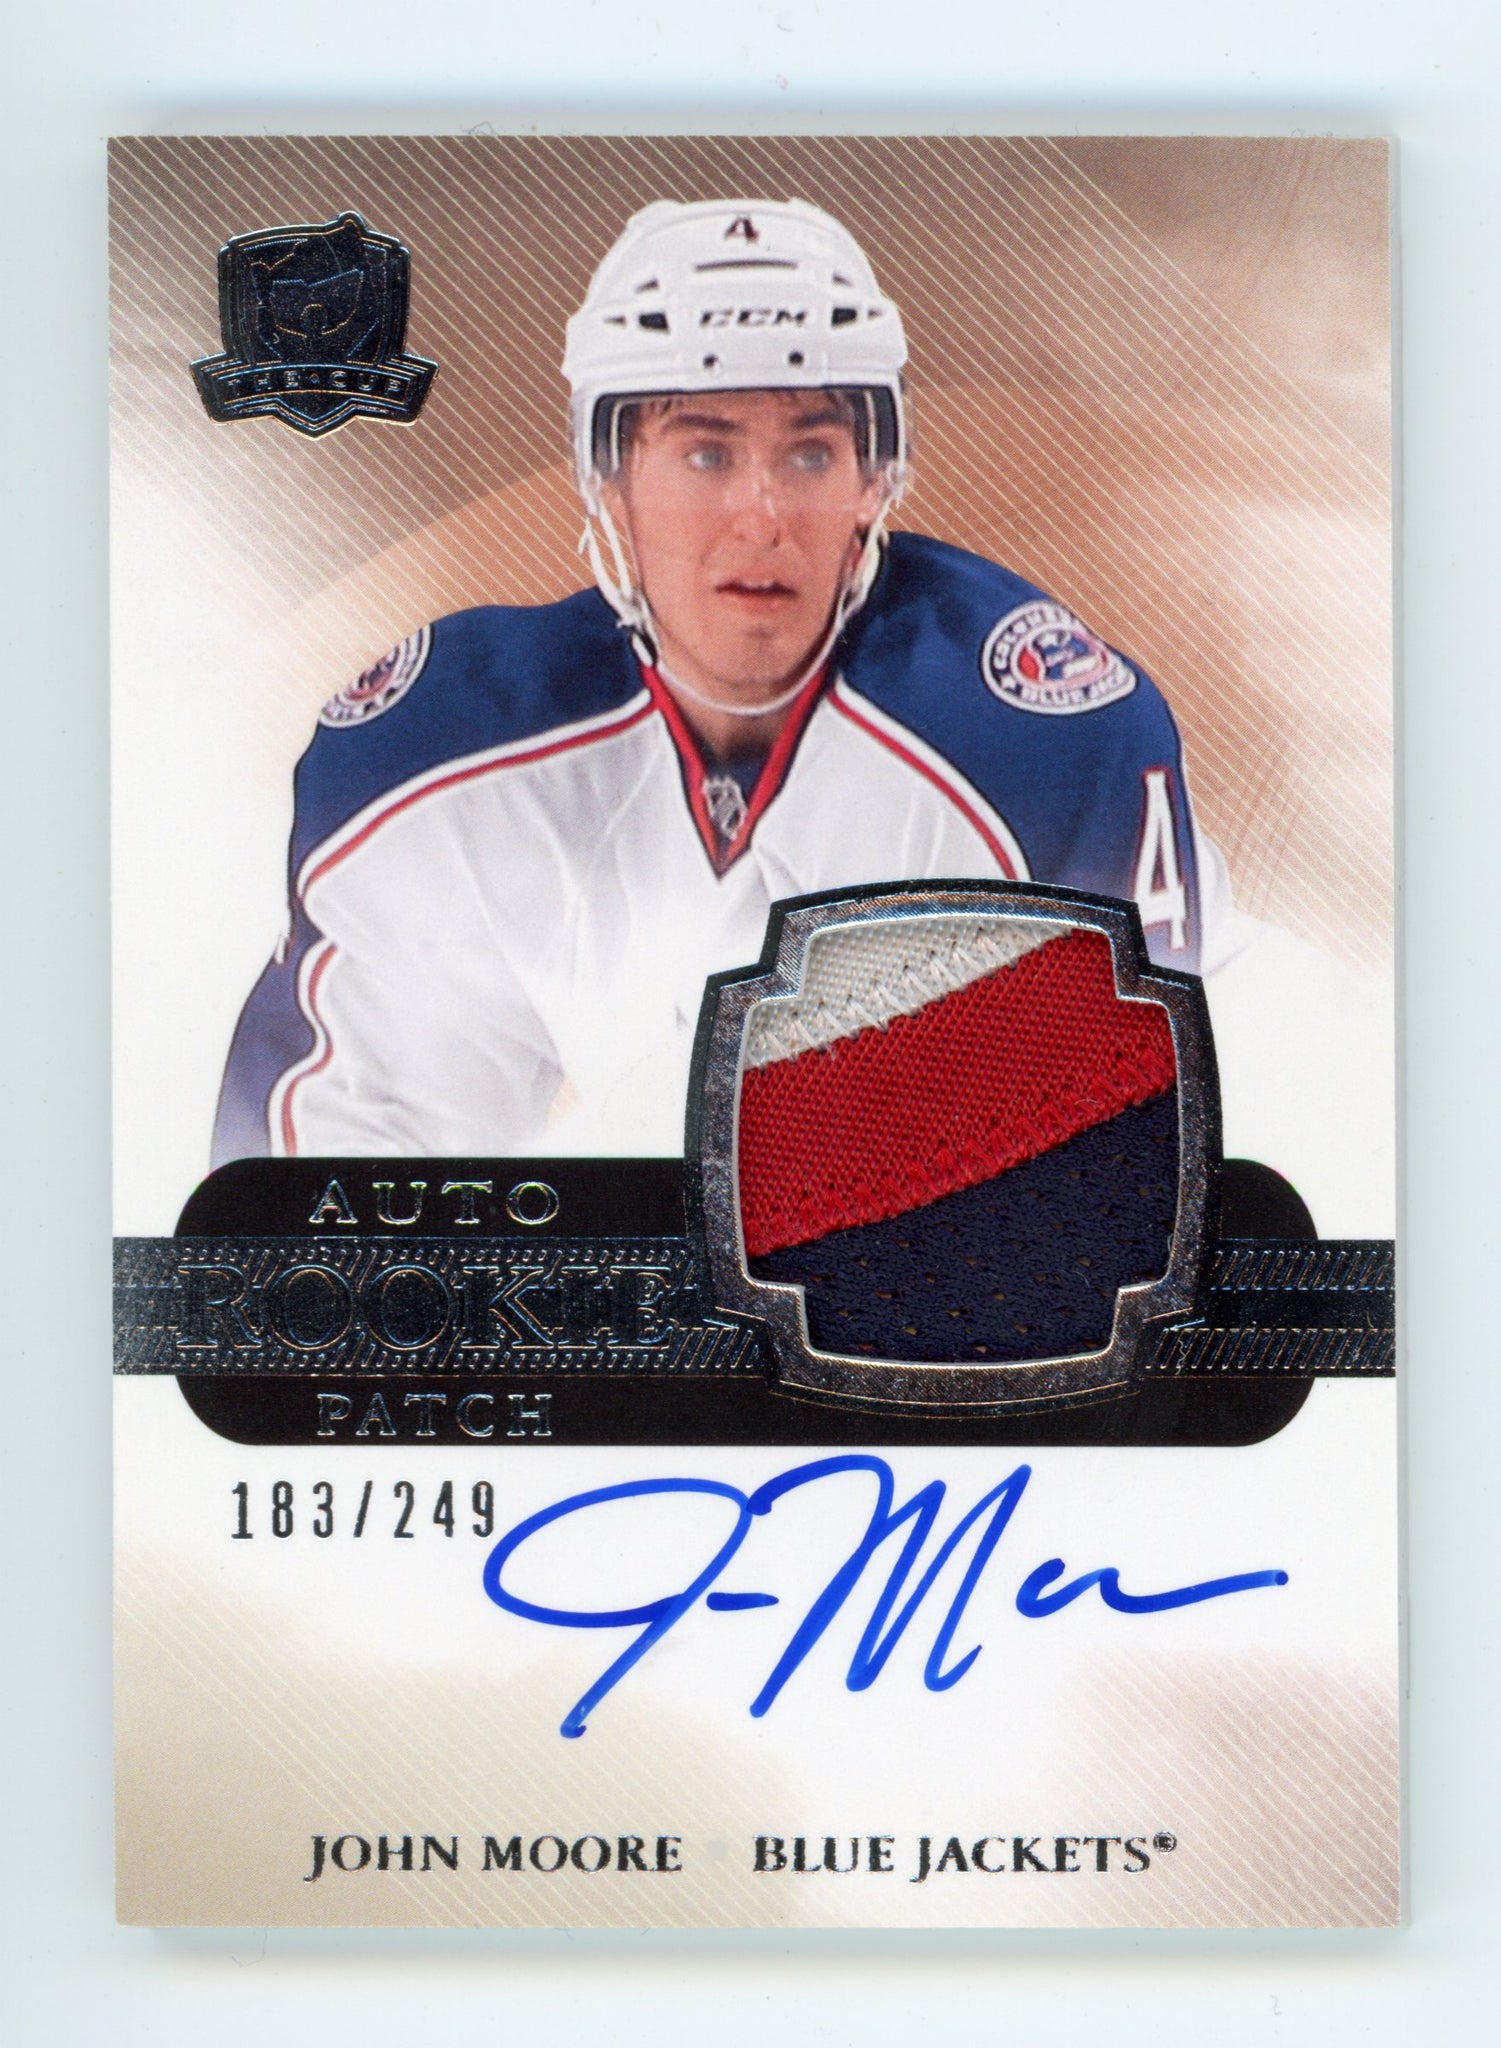 2011-2012 John Moore RPA #d /249 The Cup Columbus Blue Jackets # 144